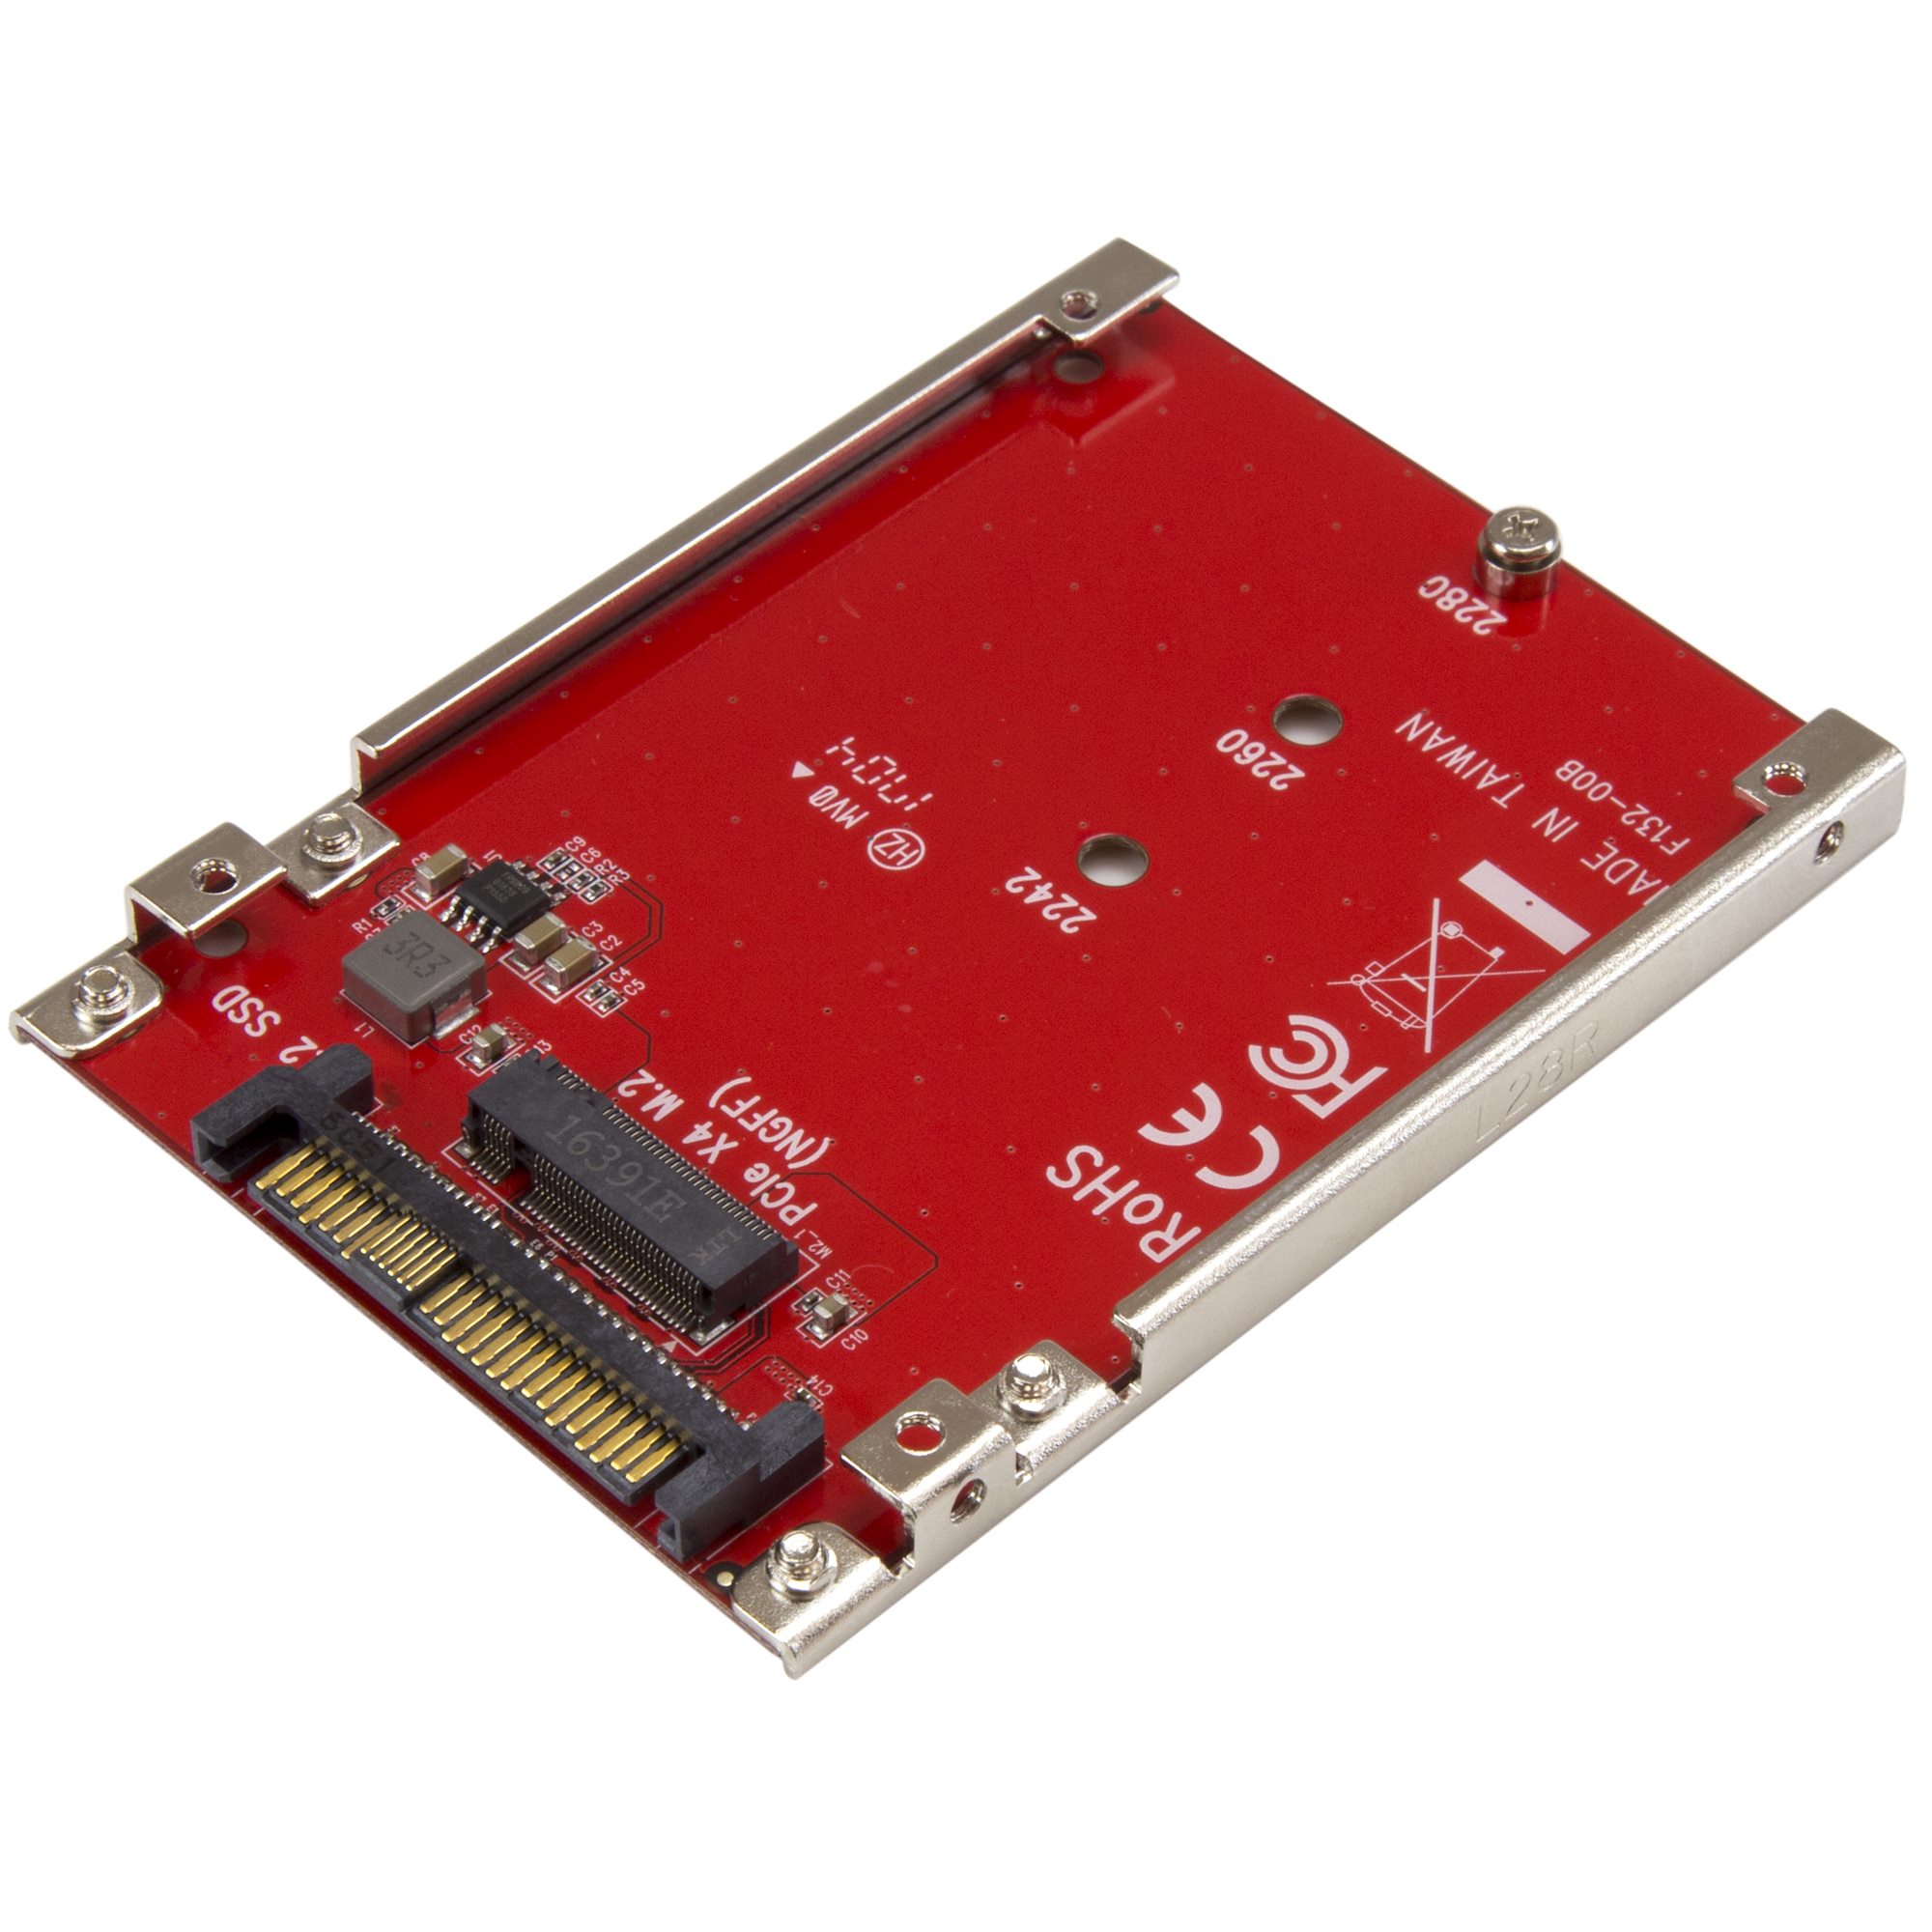 M.2 to U.2 Adapter - For M.2 PCIe NVMe SSDs - PCIe M.2 Drive to 2.5 U.2  (SFF-8639) Host Adapter - M2 SSD Converter, Red